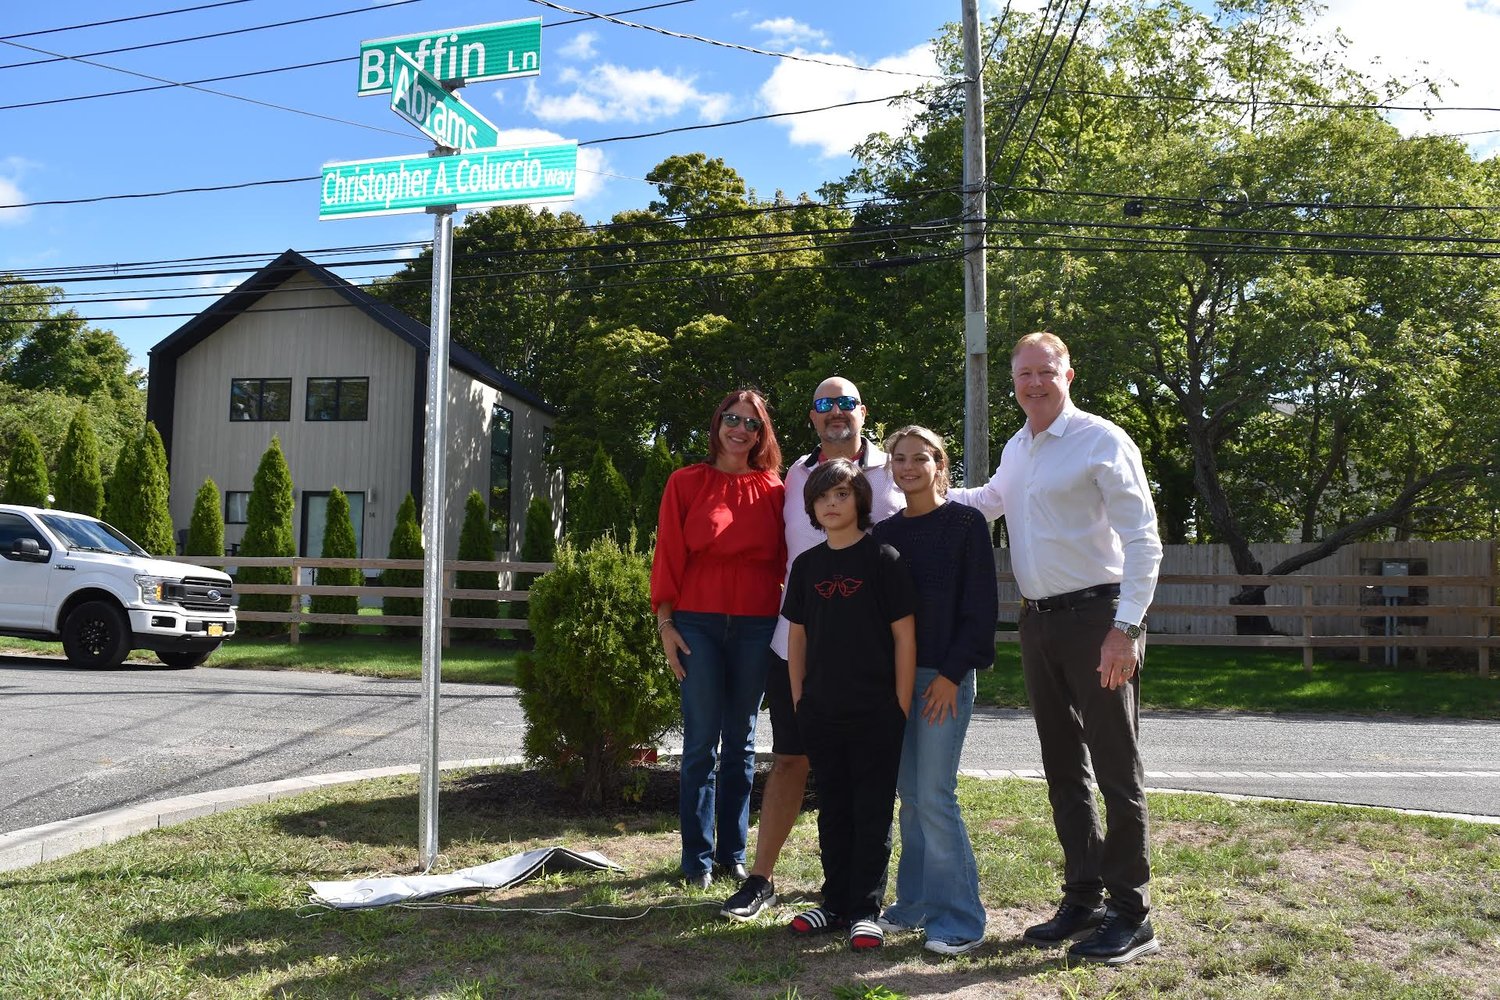 Pictured left to right are Christopher’s family (left to right): his mother Jennifer; father Christopher; brother Dominick and sister Isabella; and councilman Foley.